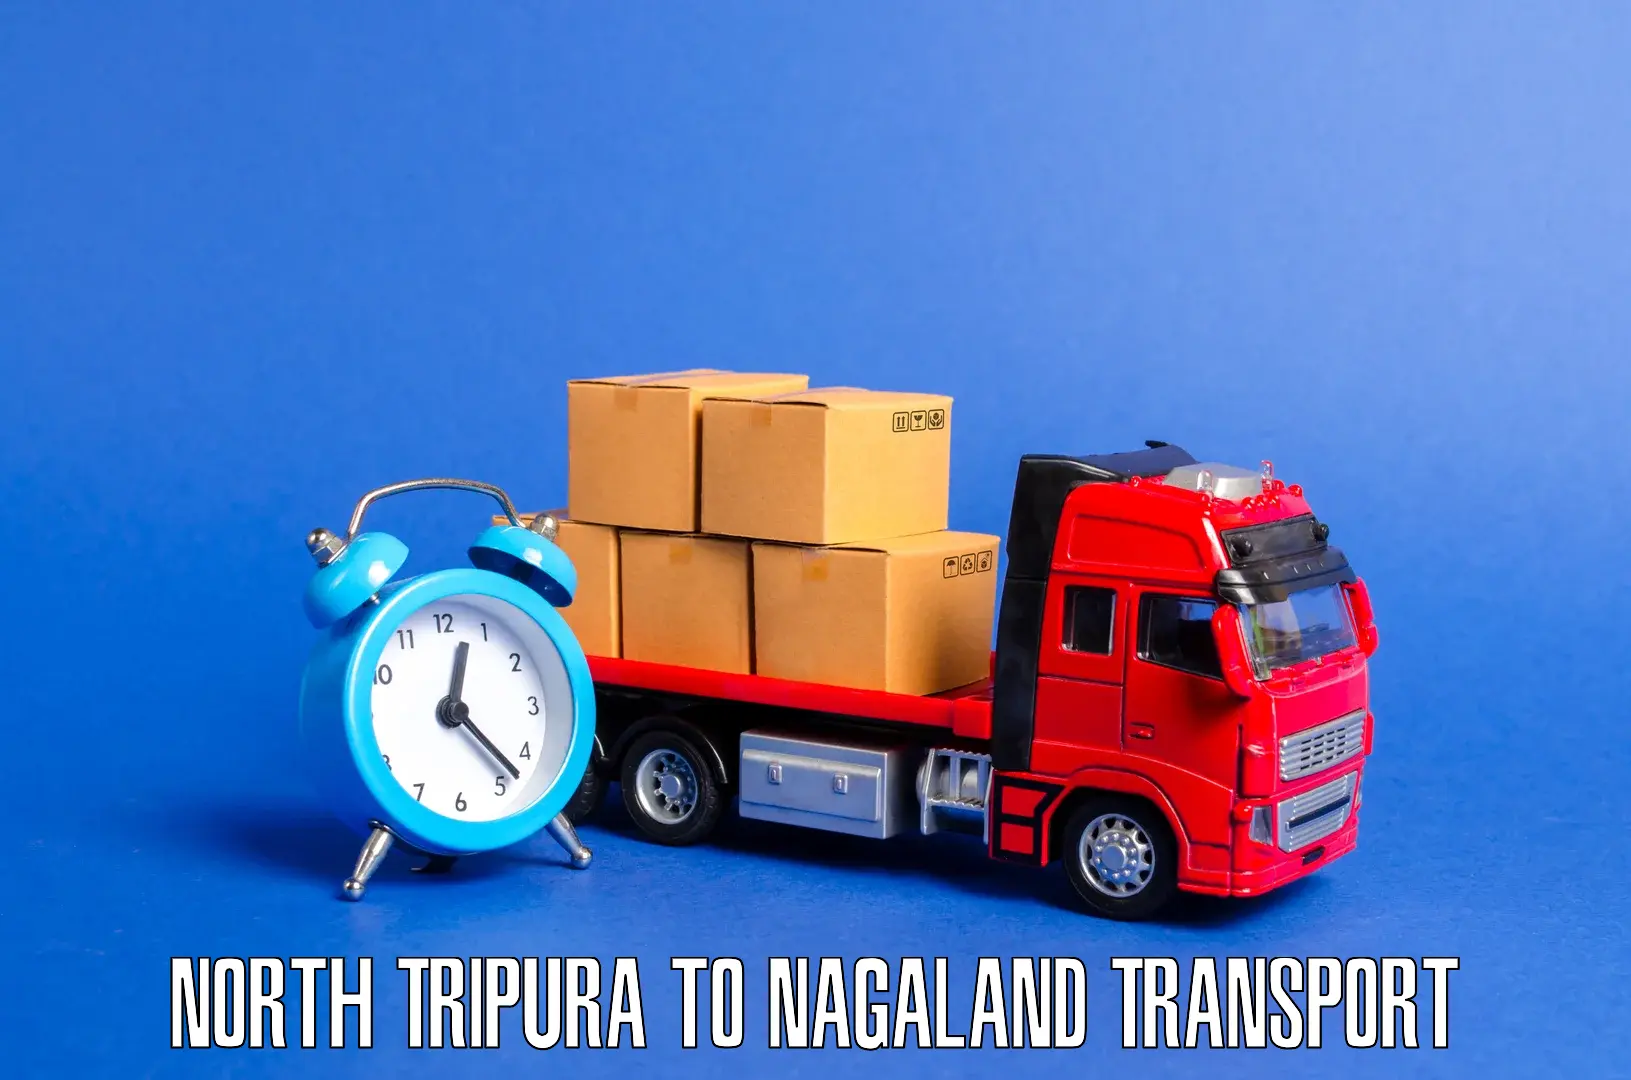 Two wheeler parcel service North Tripura to Nagaland